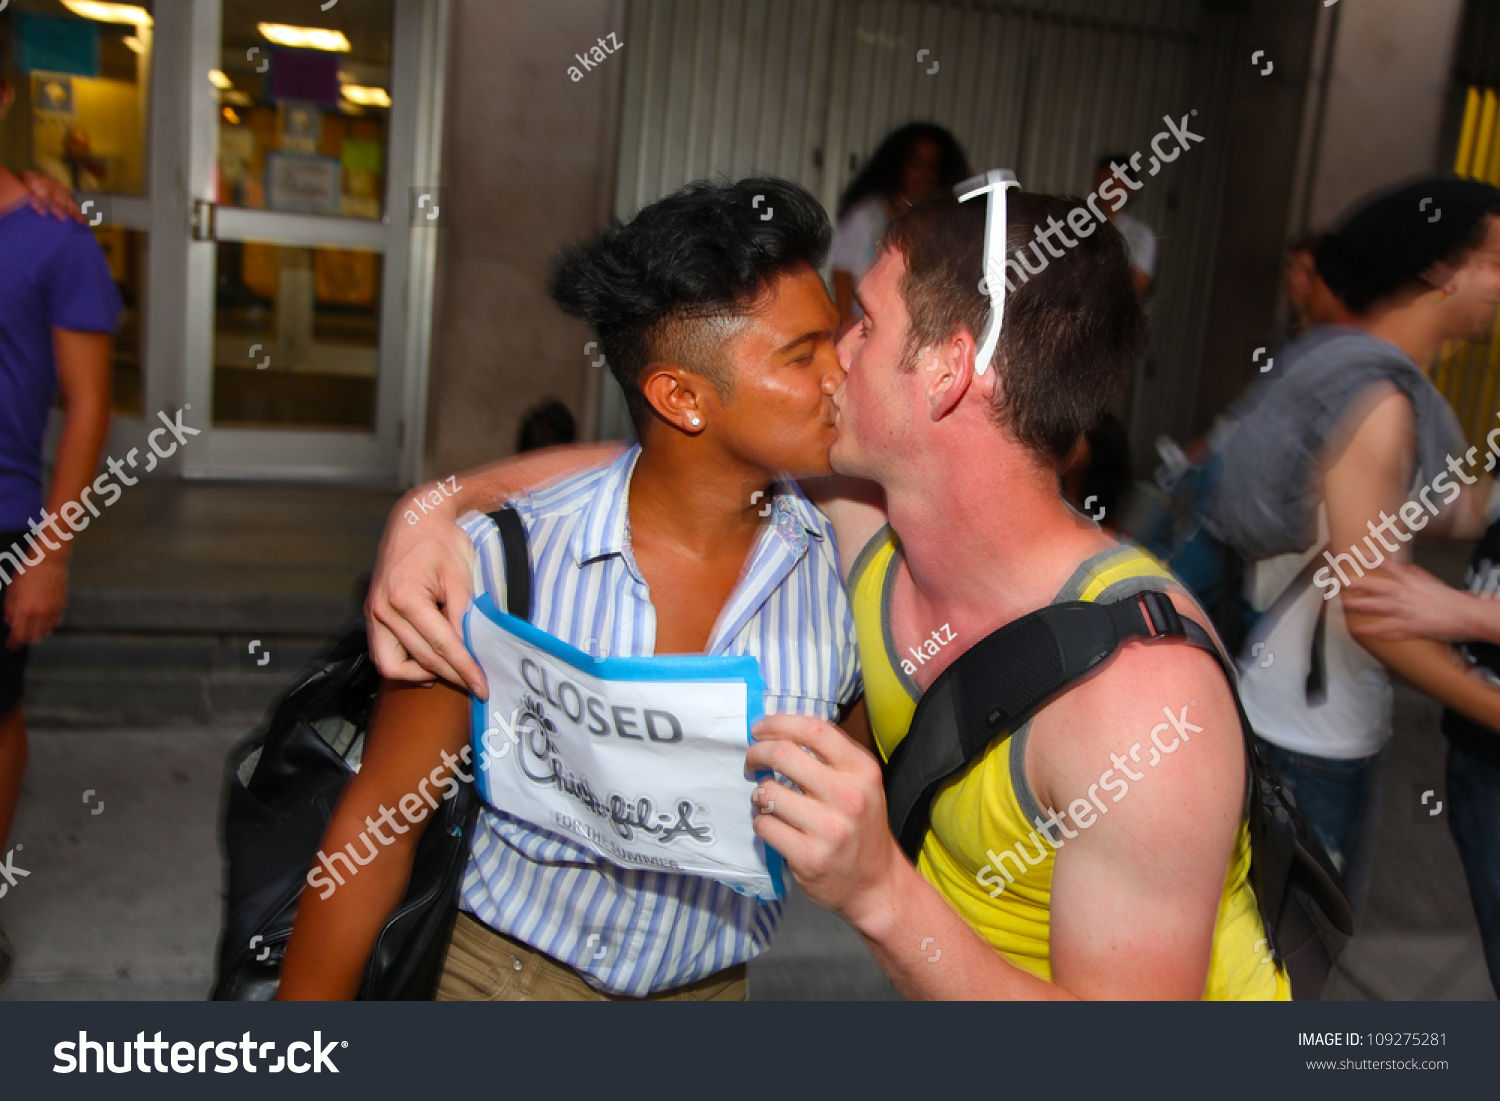 New York City August 3 National Same Sex Kiss Day Began In Response